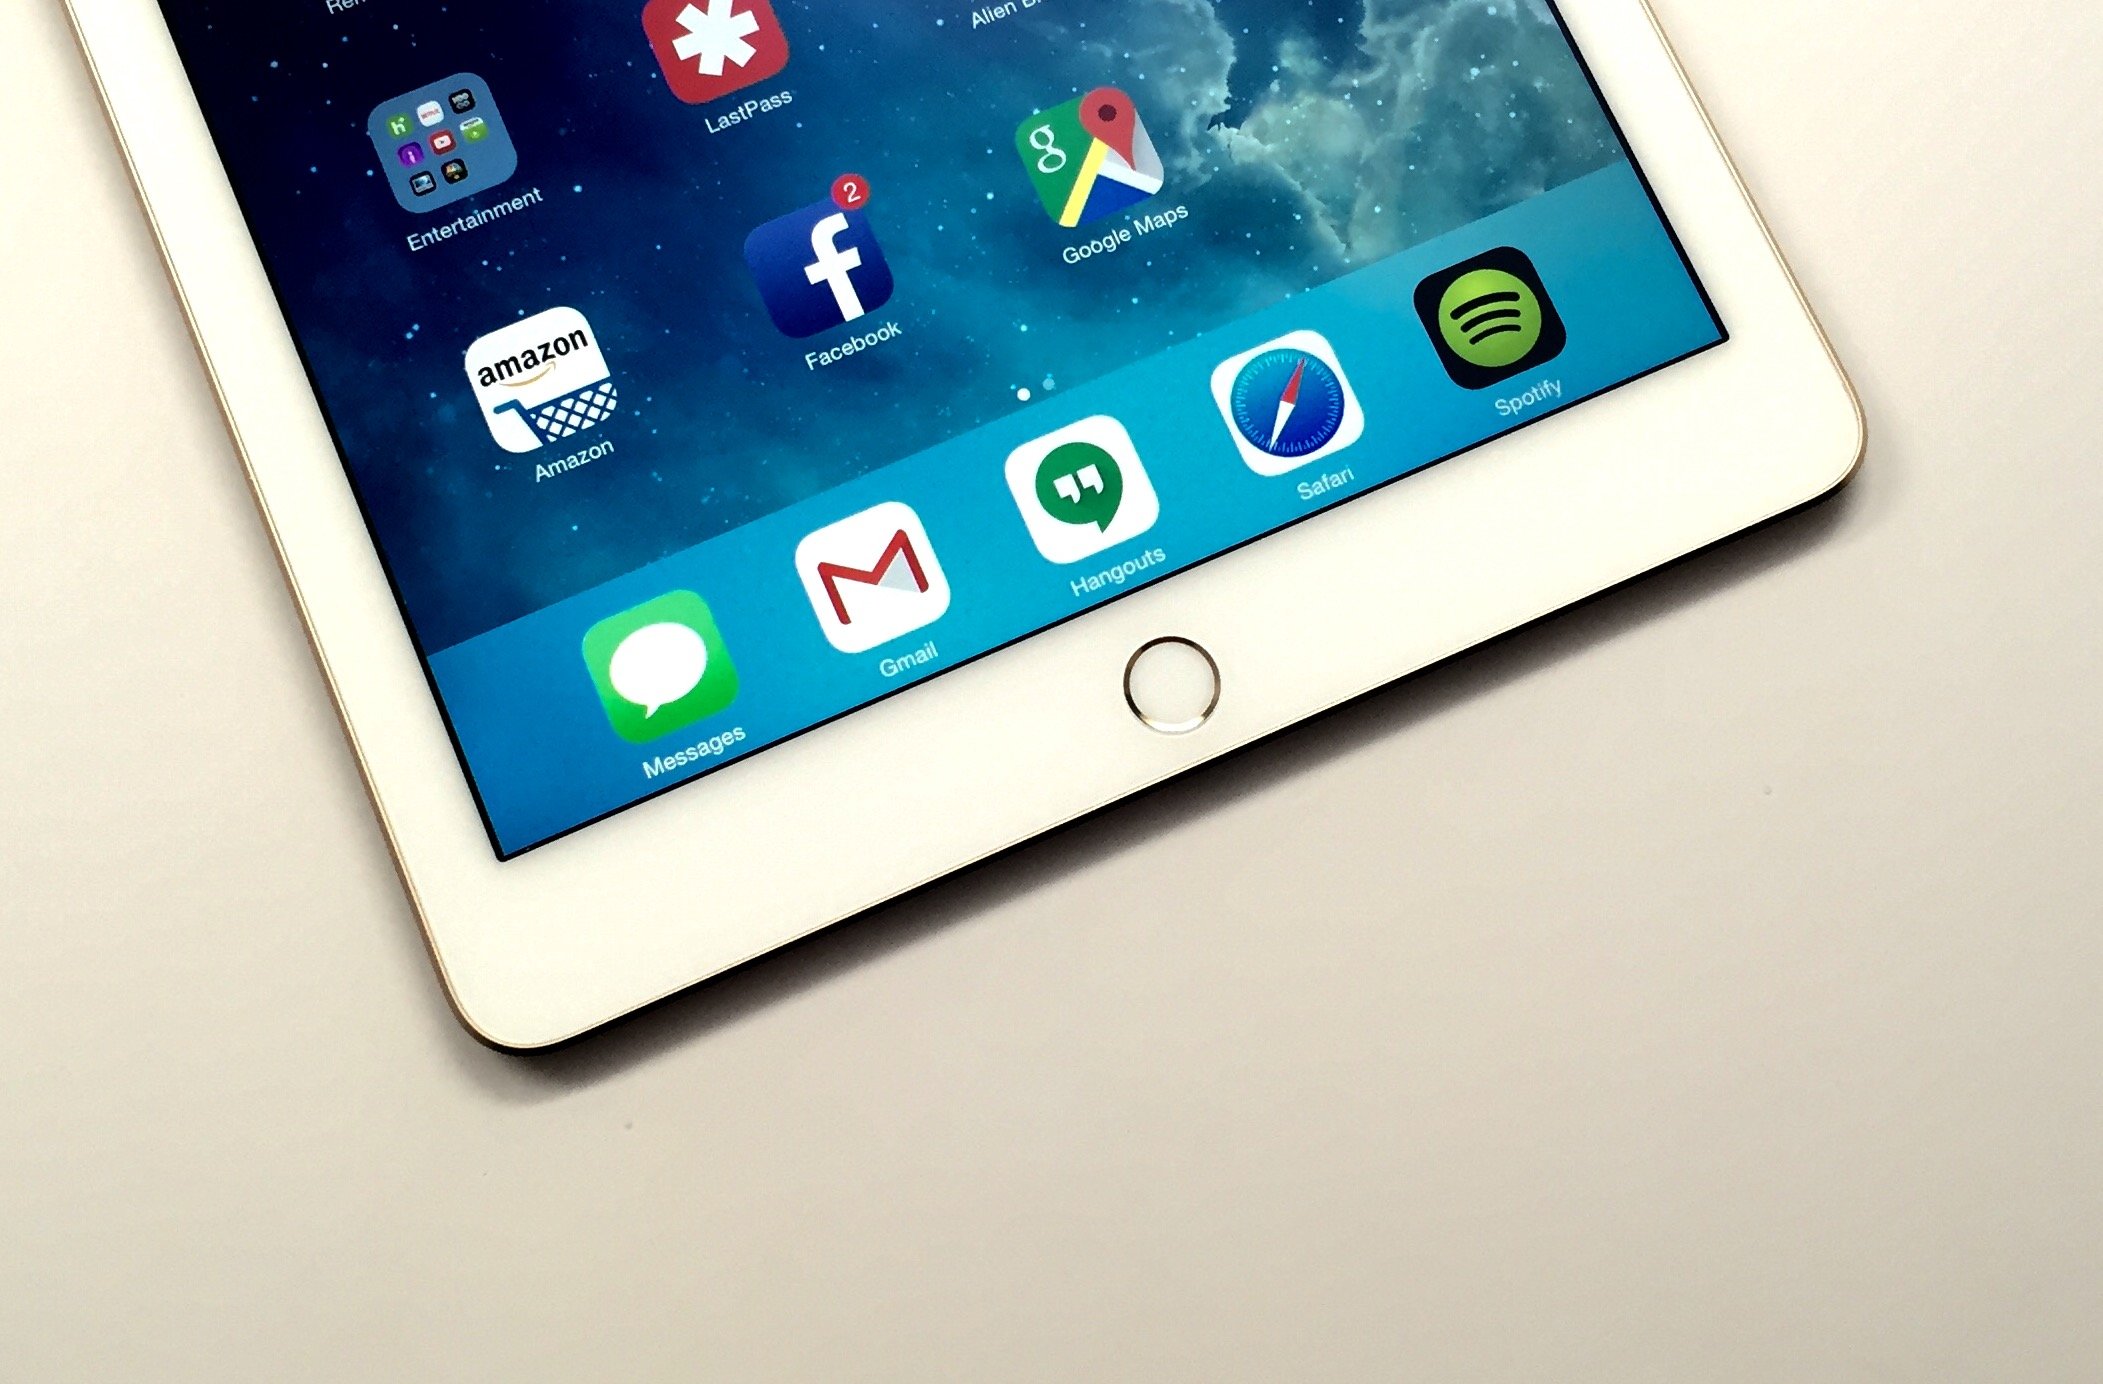 After testing common iPad apps, our most used apps work great on iOS 8.1.3 on the iPad Air 2.